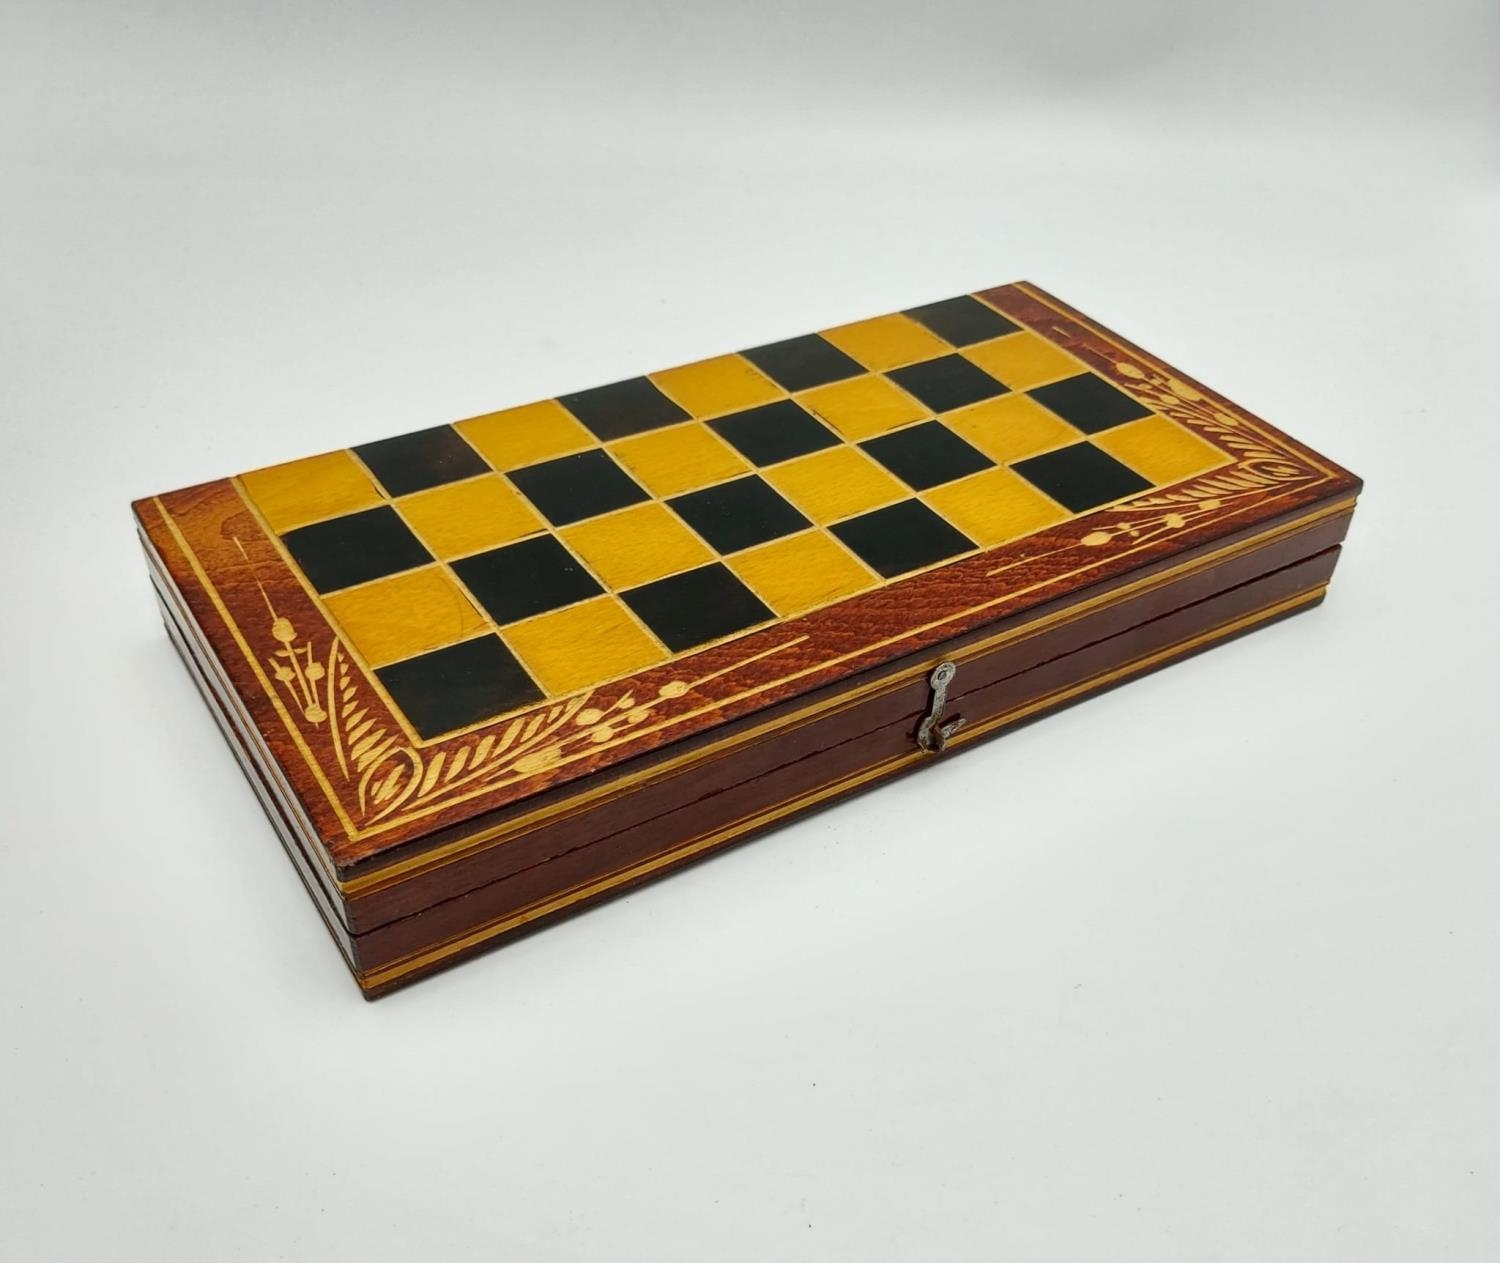 A Vintage Wooden Chess Set with Folding Board. Backgammon board on interior. 26 x 26cm. - Image 6 of 6